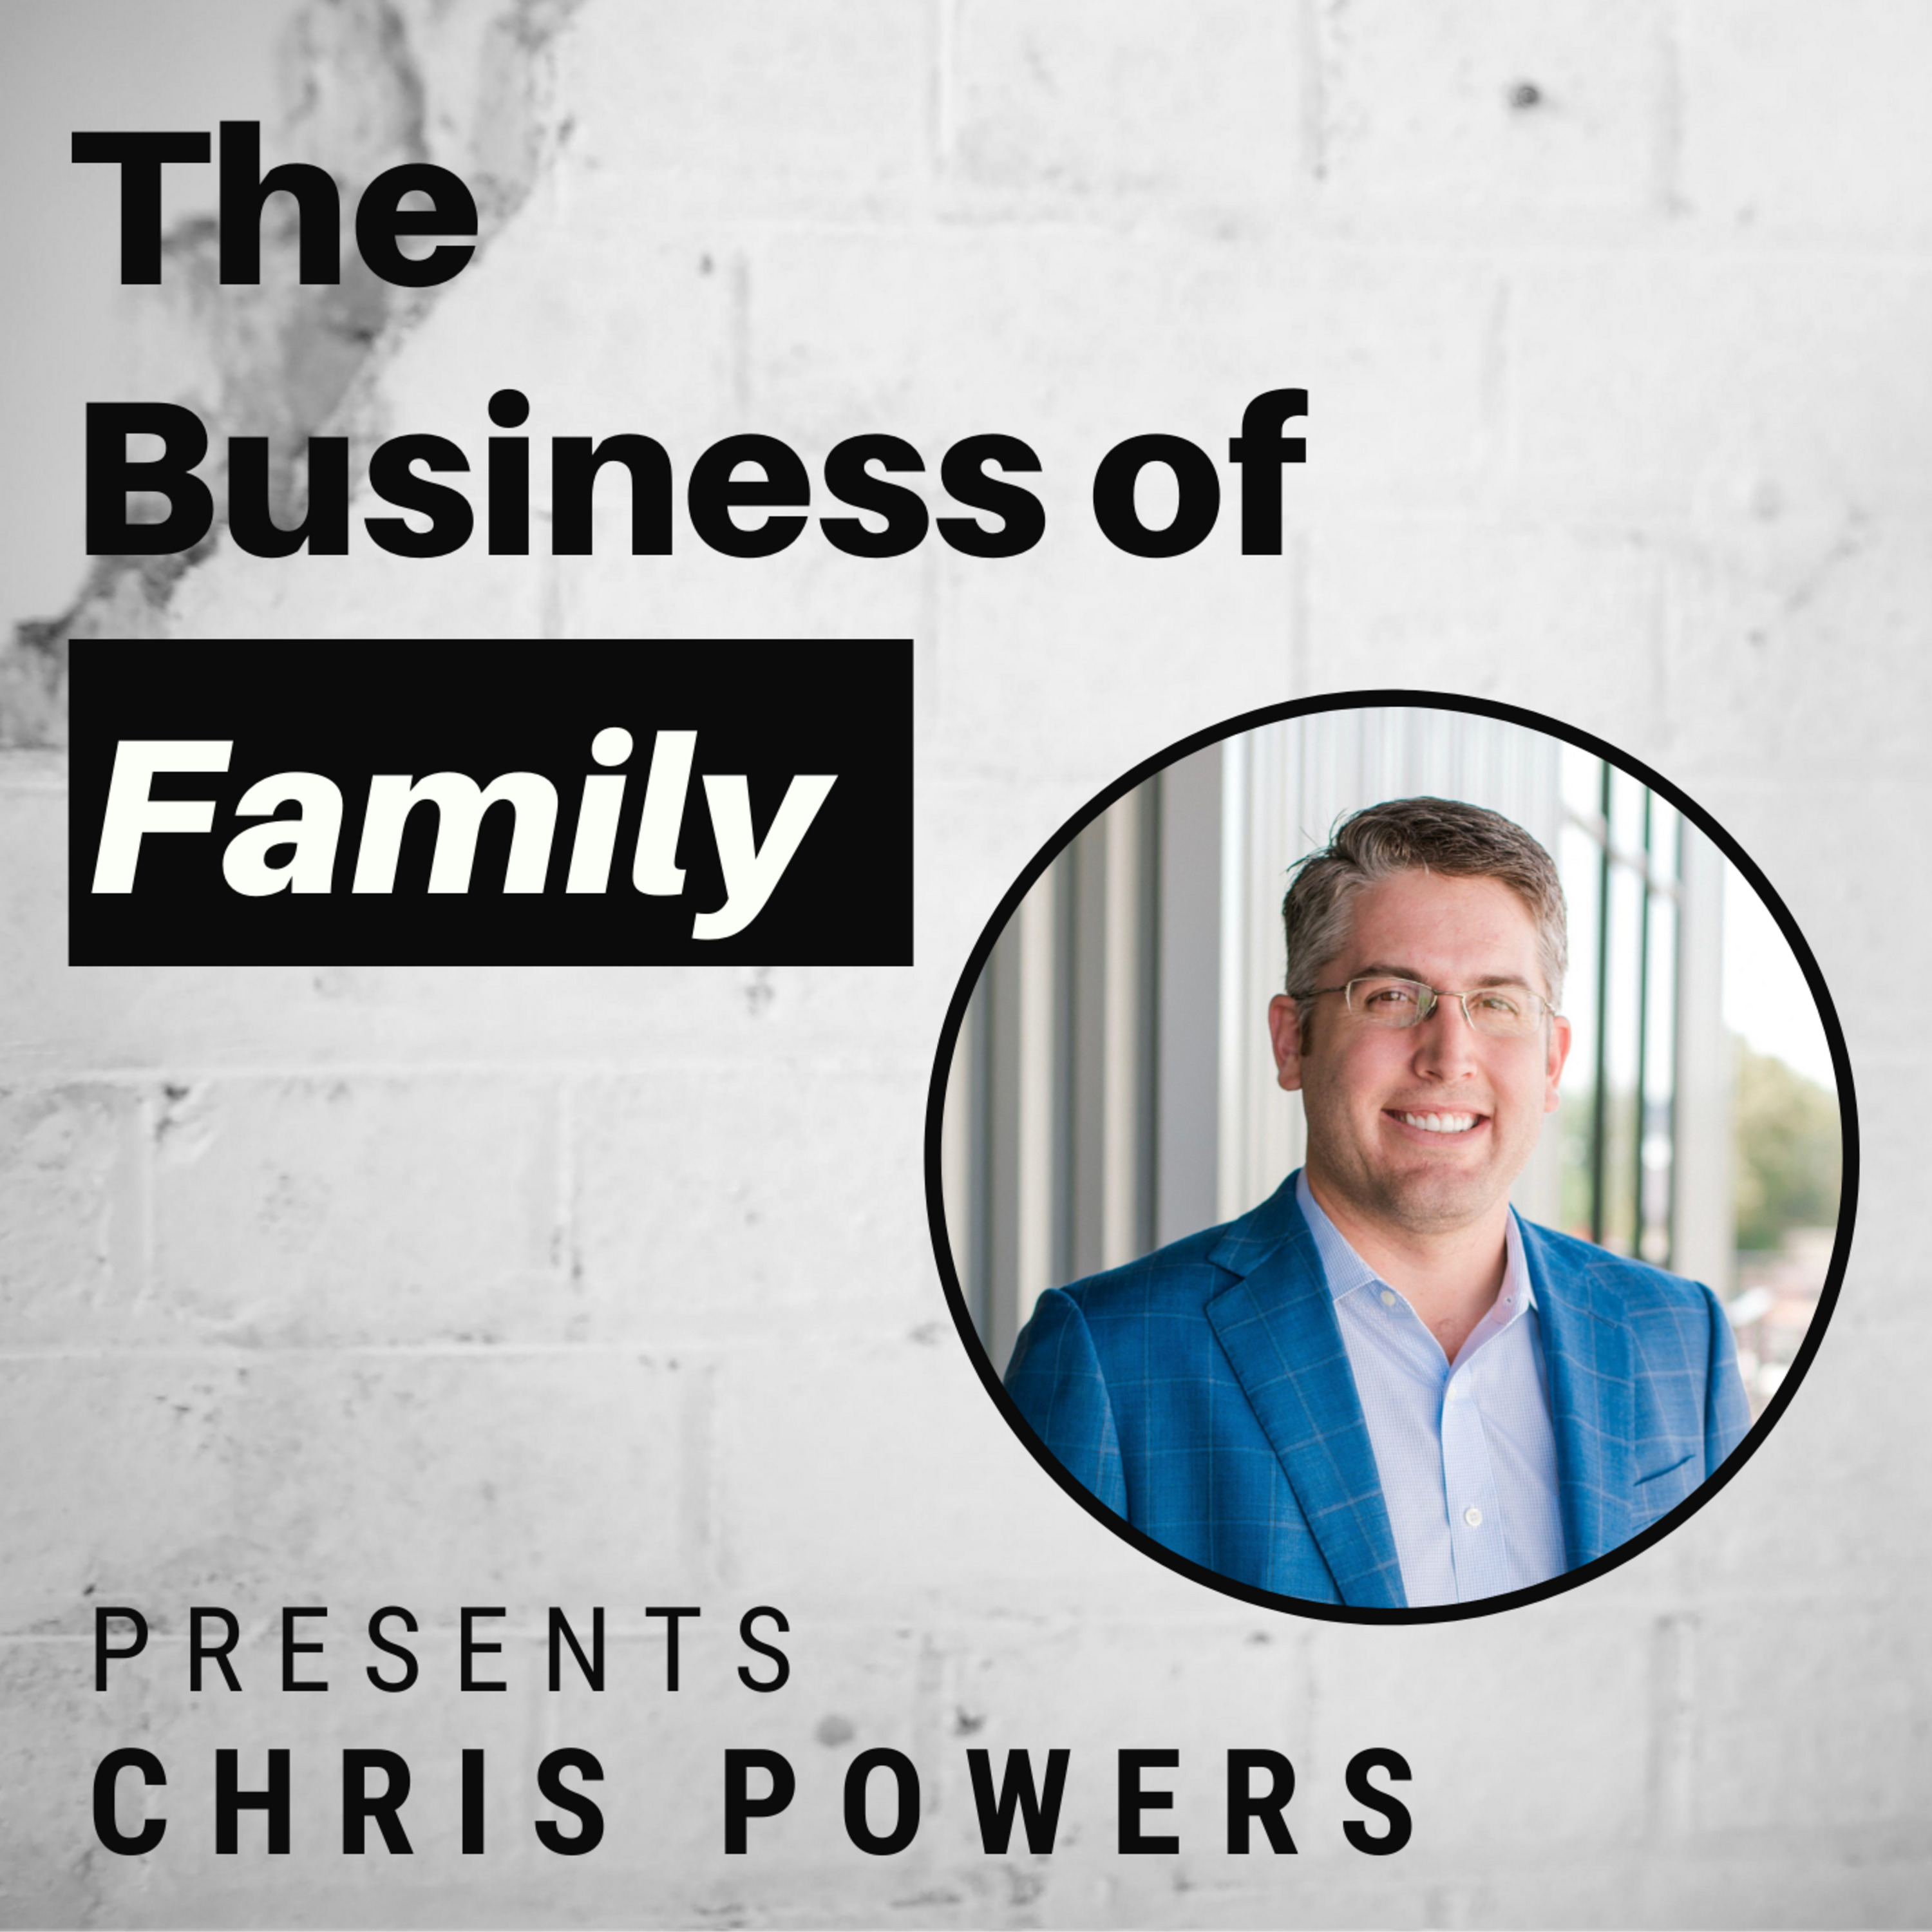 Chris Powers - How Big Of An Impact Do You Want To Have?